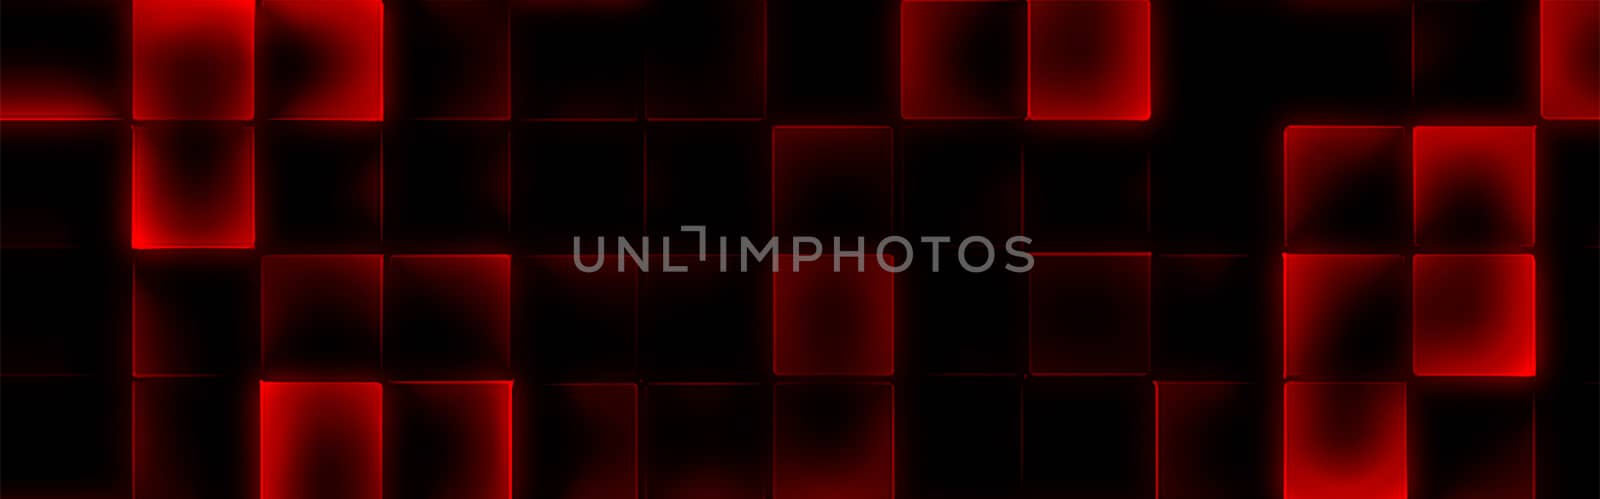 Abstract background for web design with sqares. Colorful gradient.